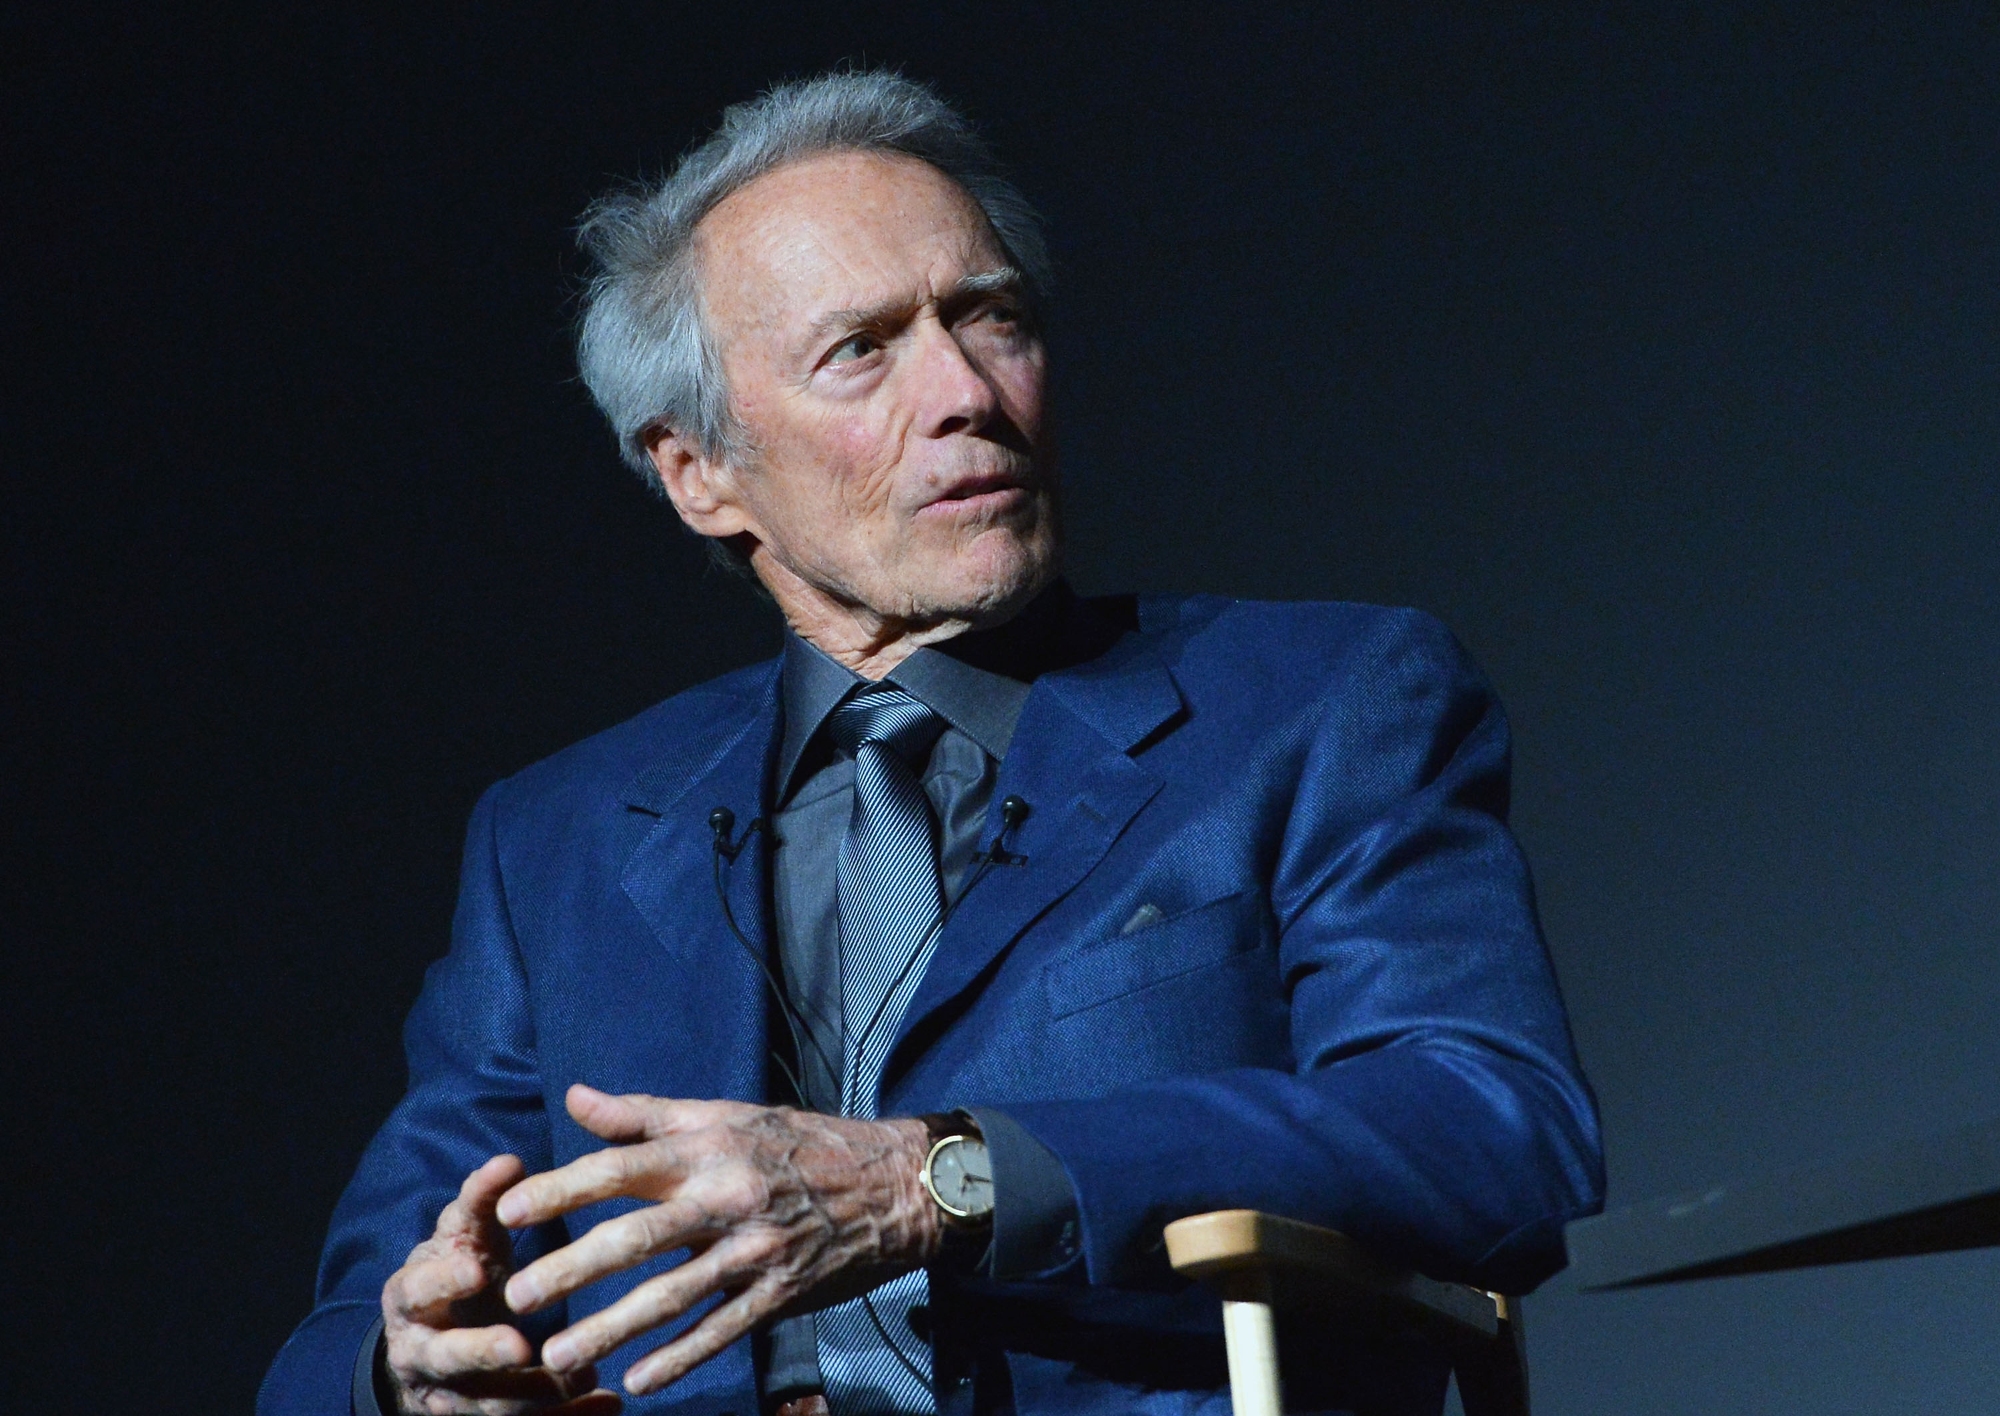 Clint Eastwood, who saved Howard Hawks' horses. He's wearing a blue suit jacket while sitting in a chair. He's looking to the side, talking.